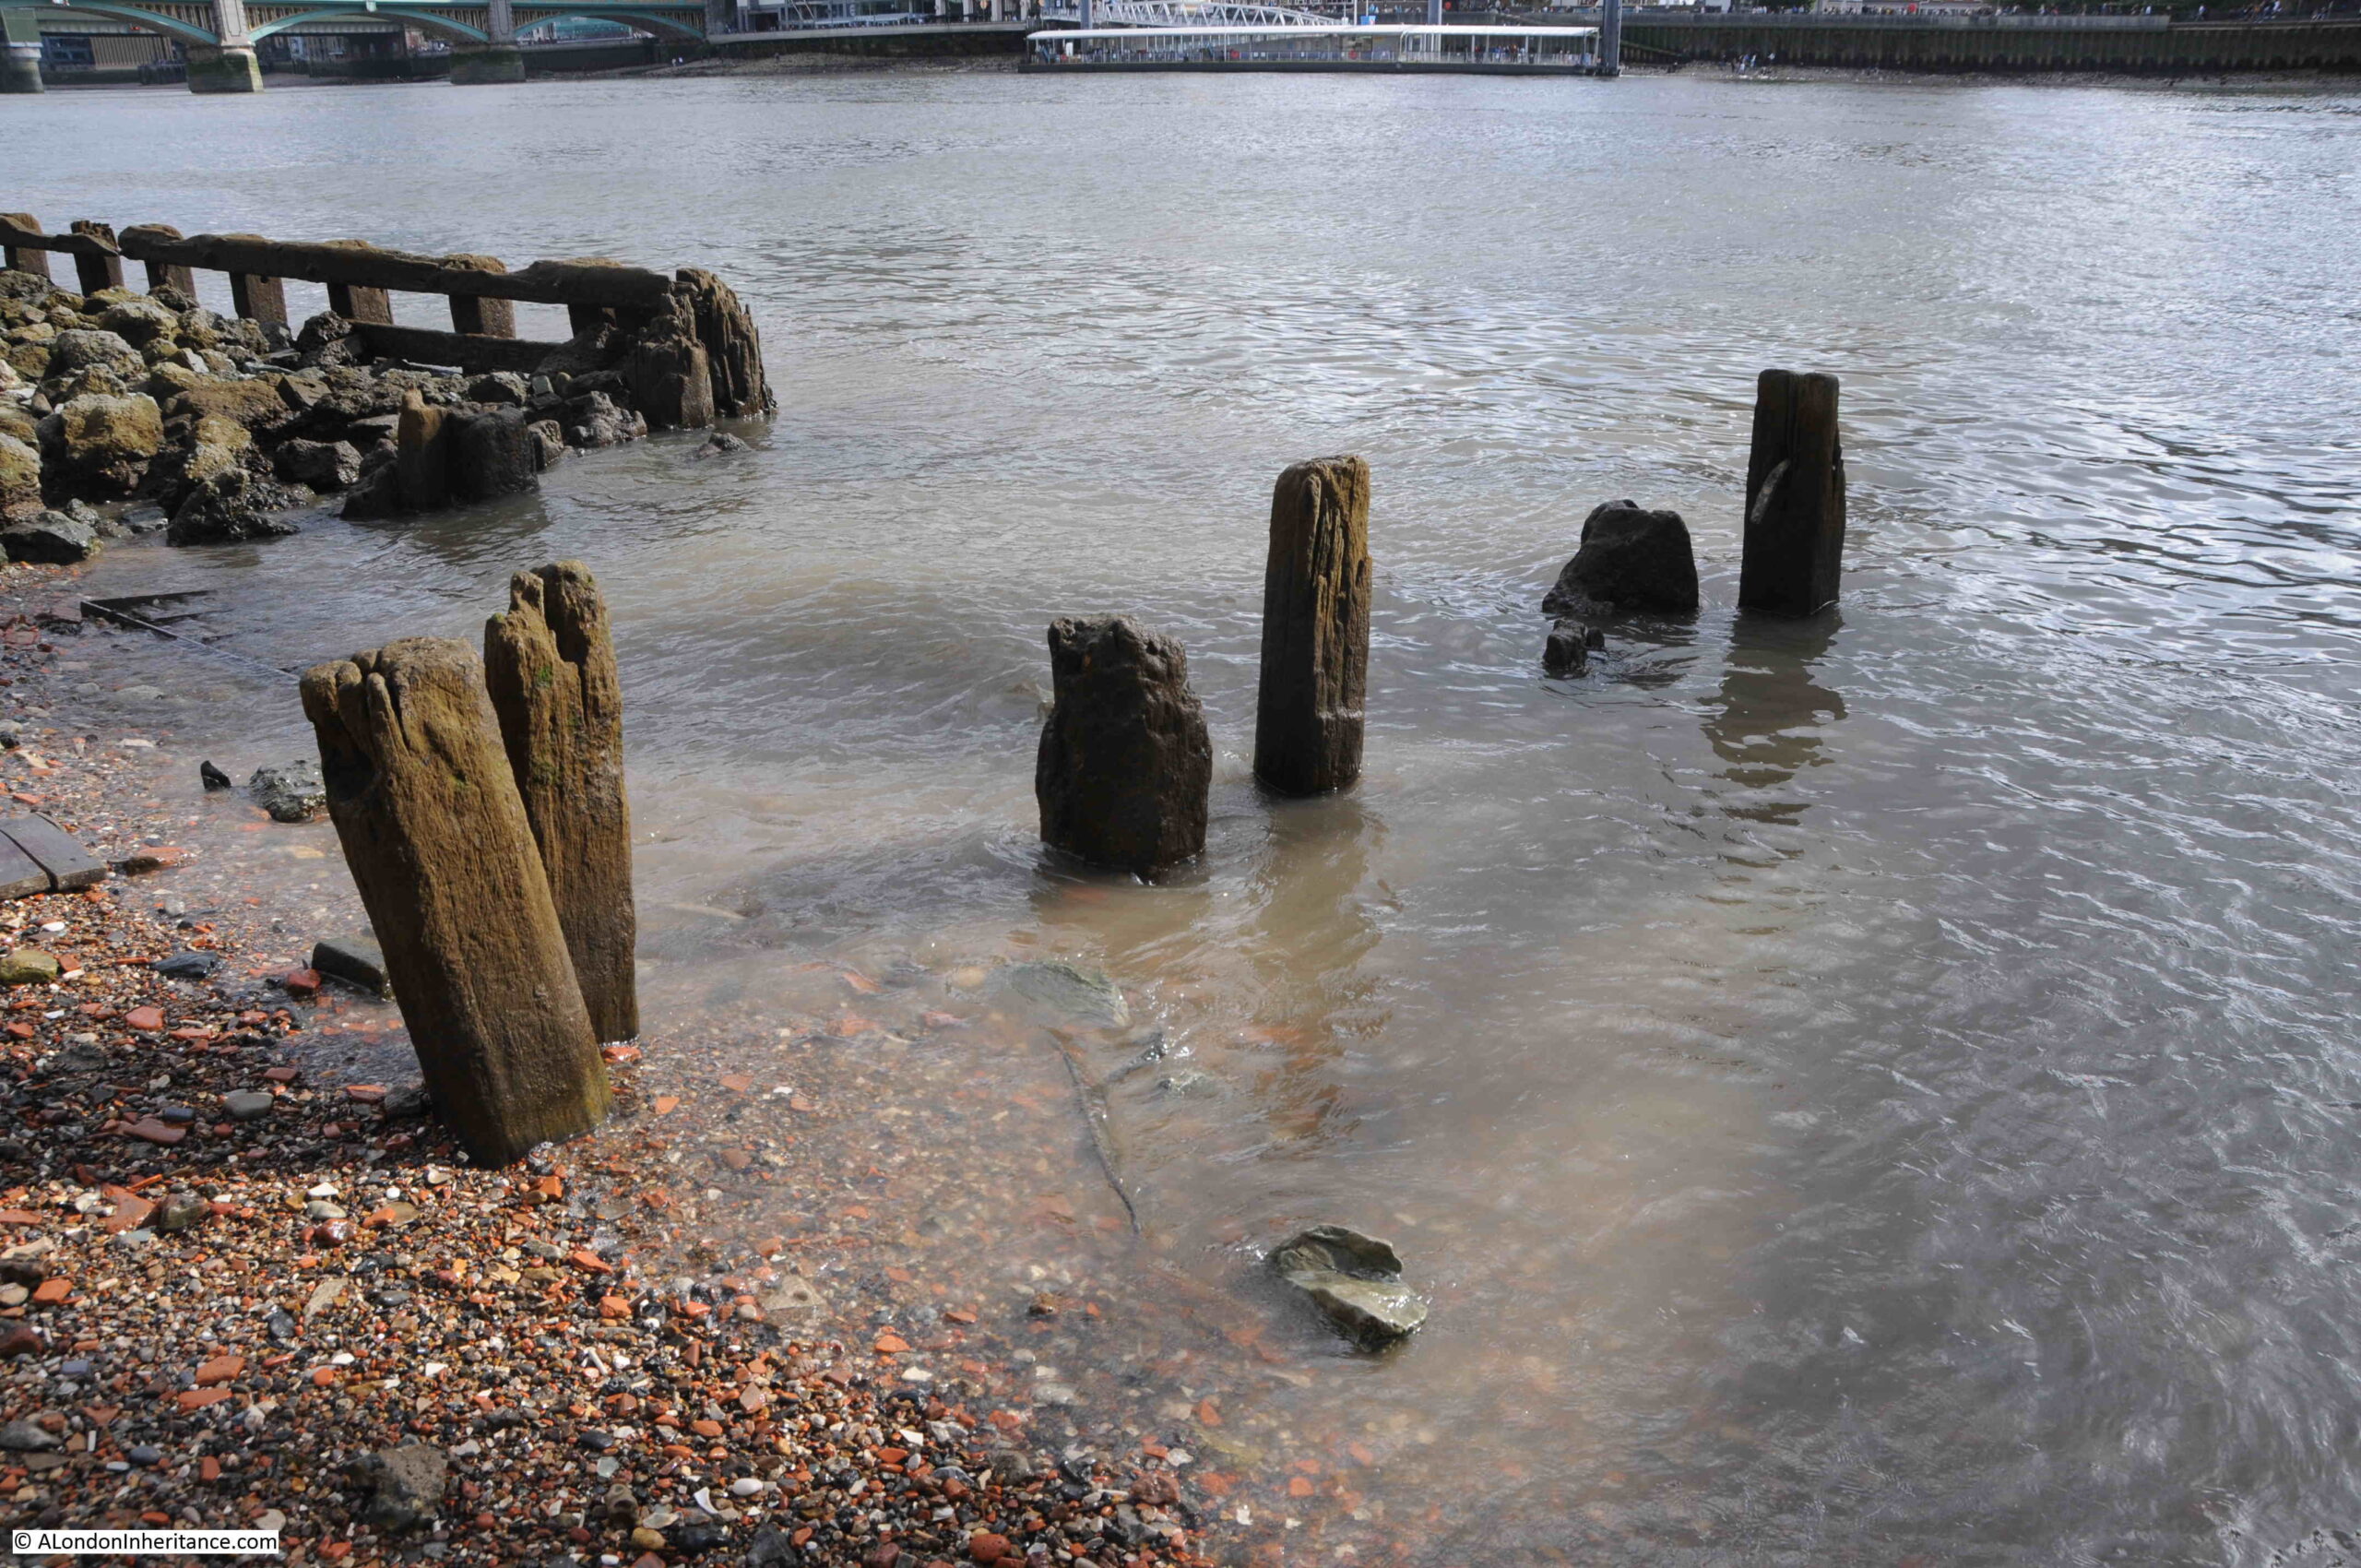 Wooden structures in the Thames